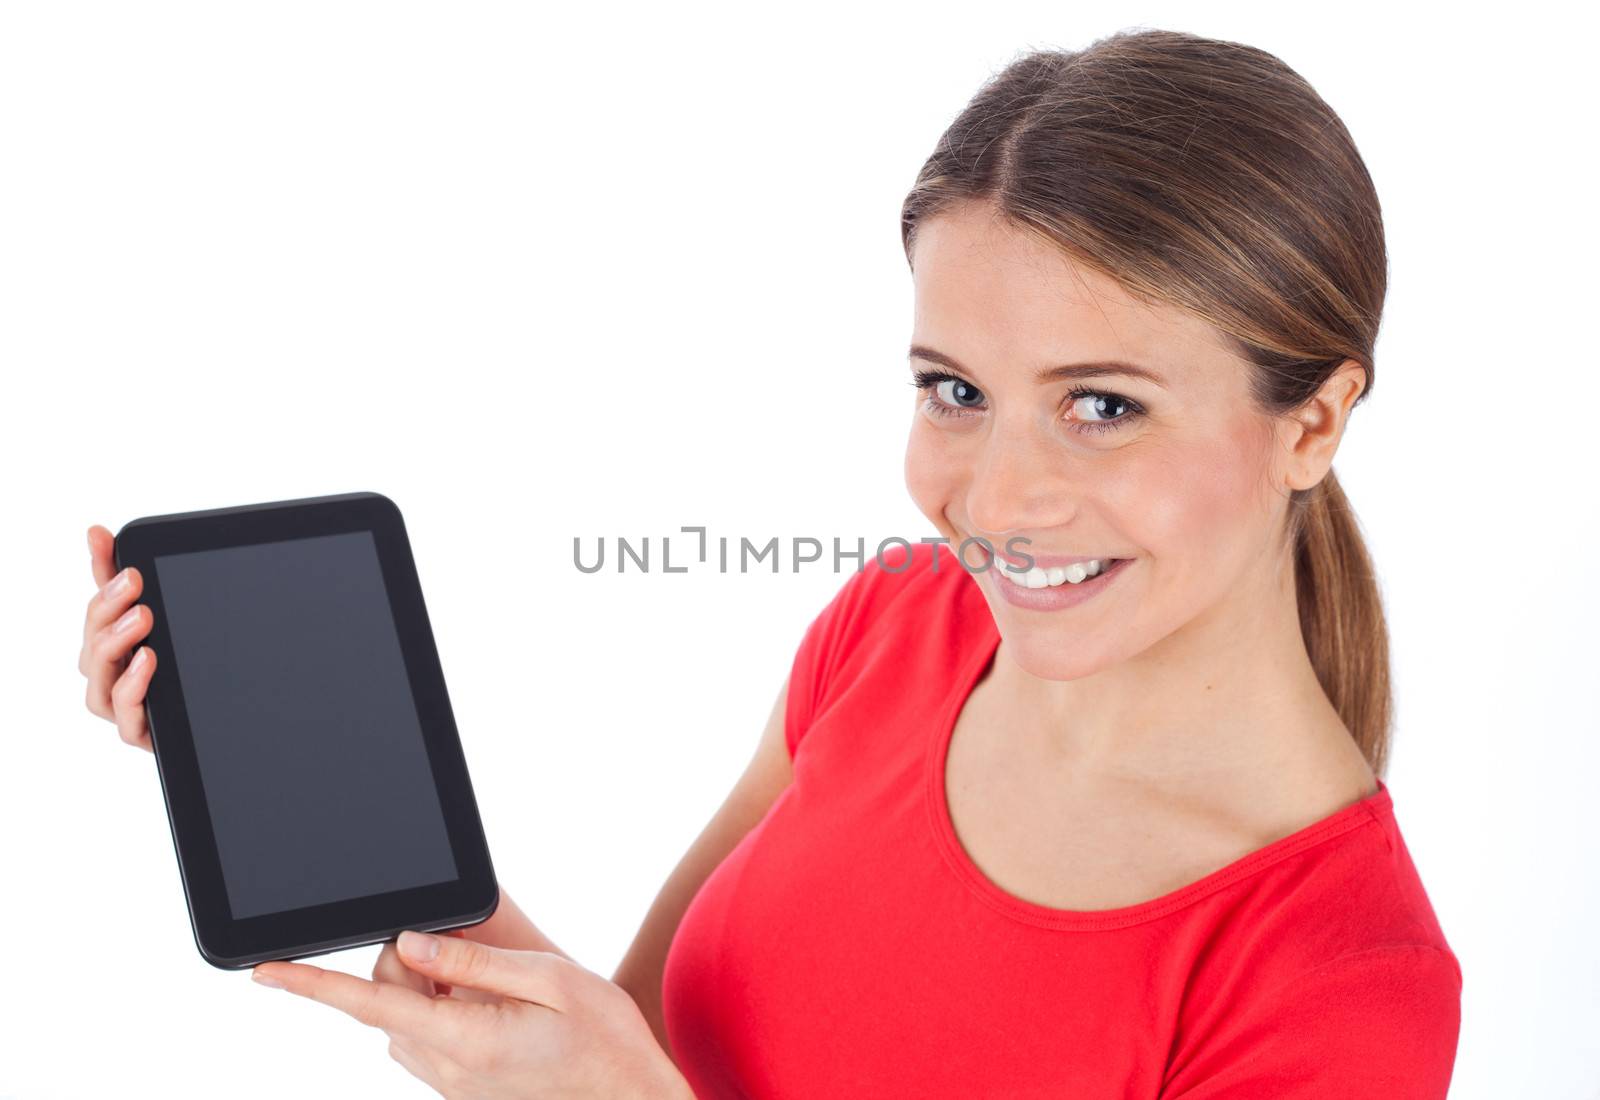 Cheerful girl presenting a blank electronic tablet, communication concept